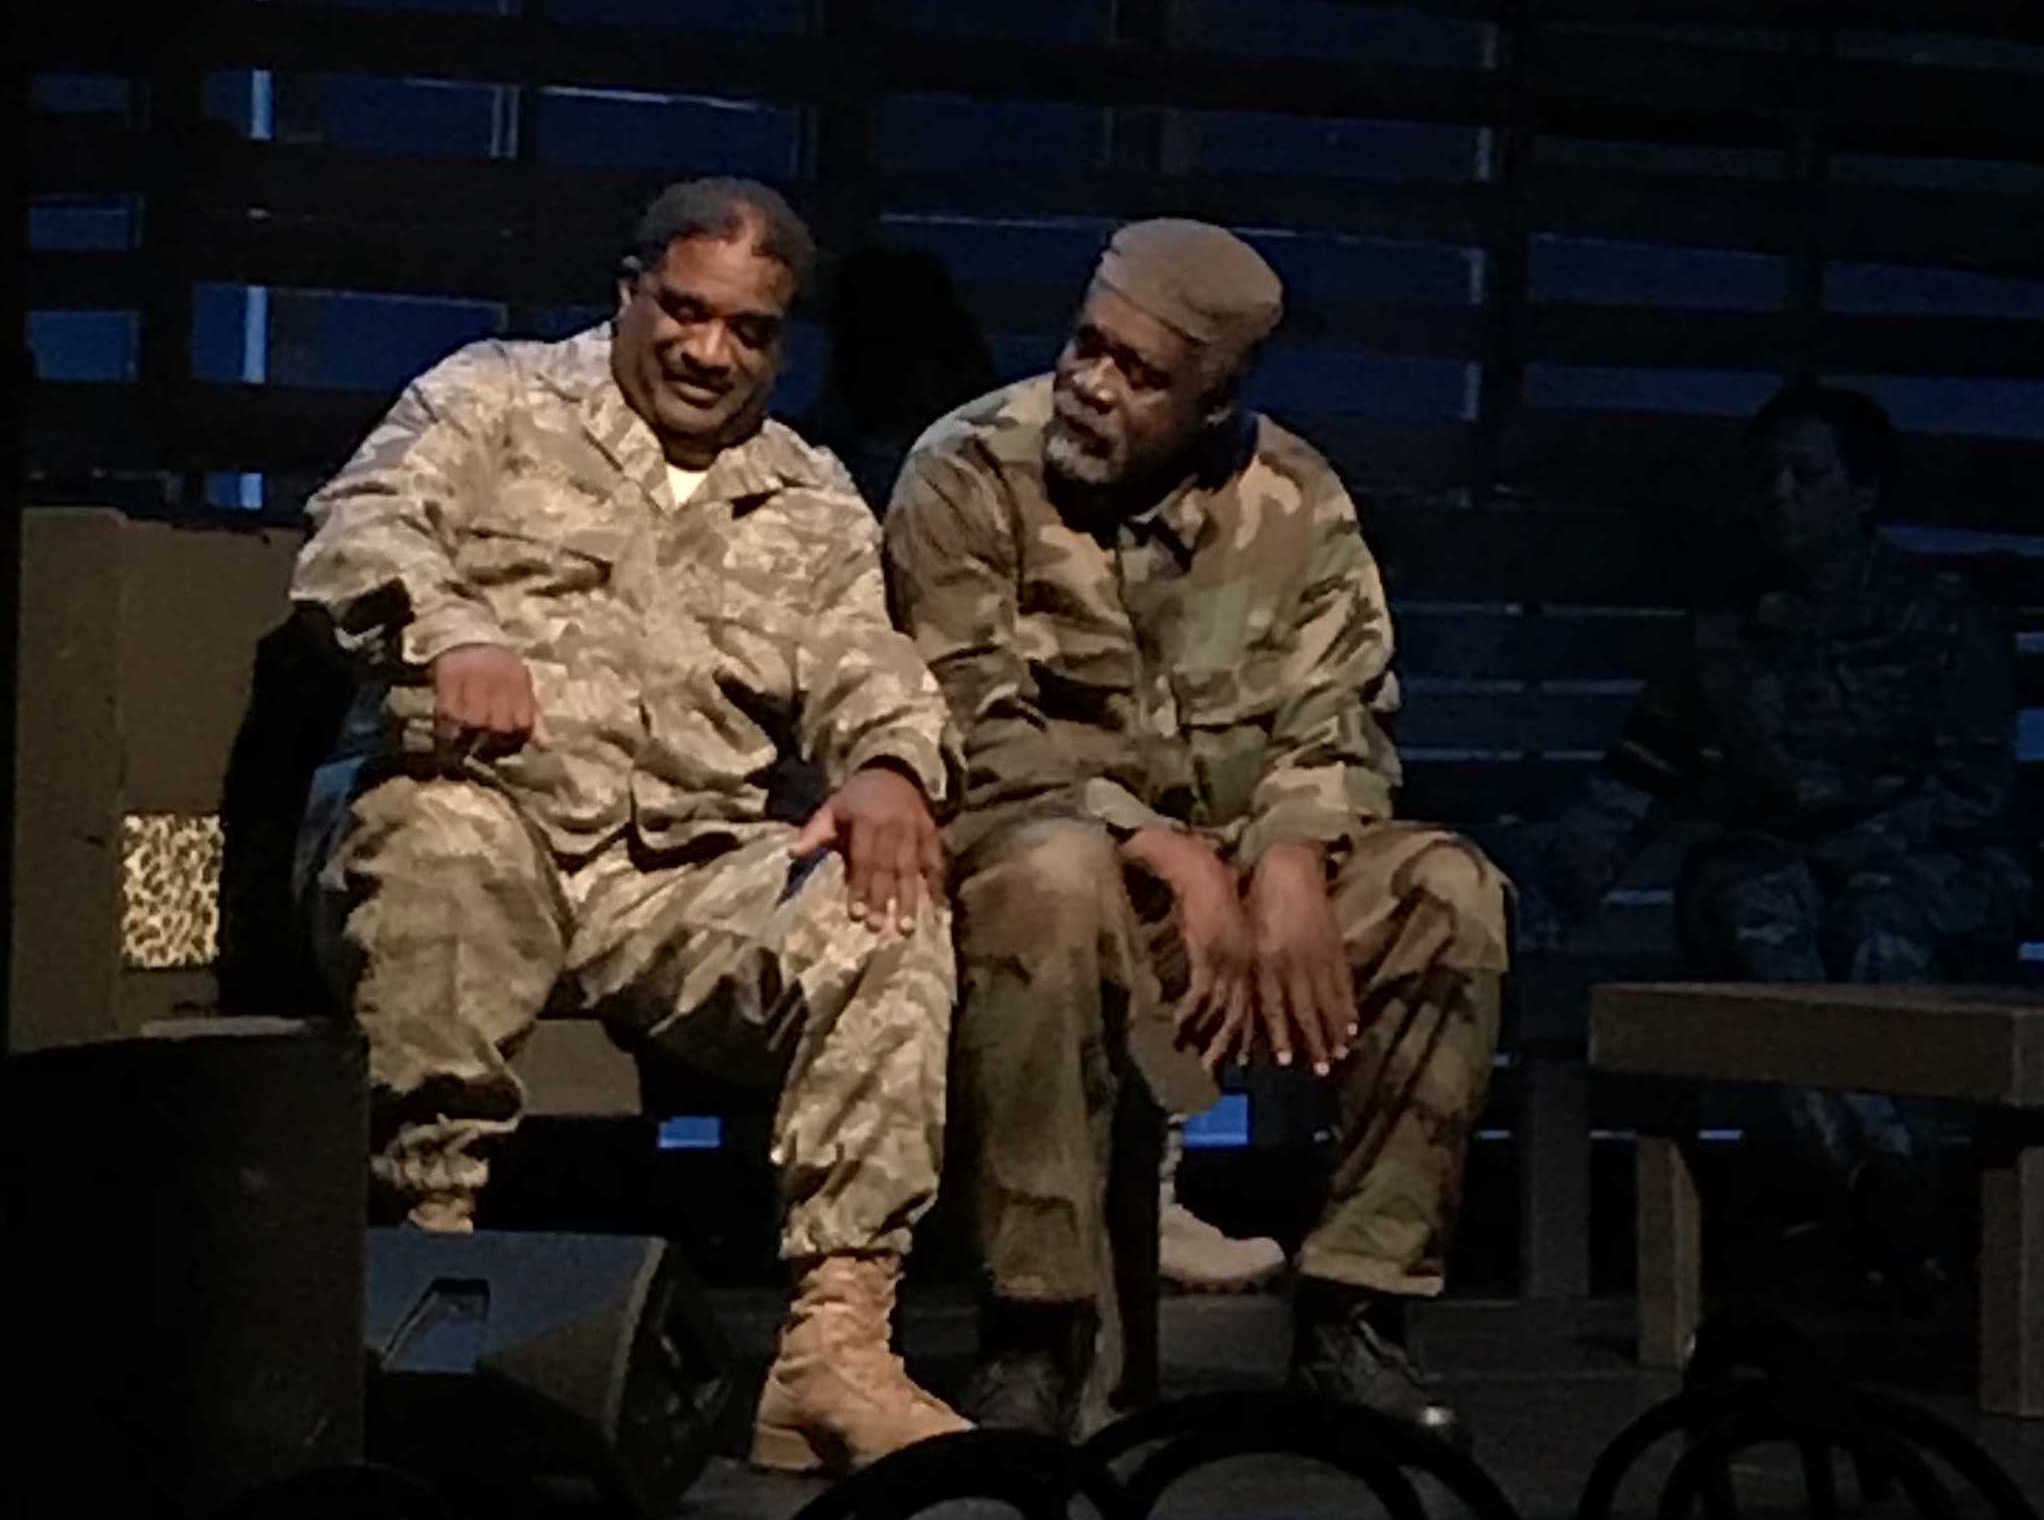 (L-R) Monty Montgomery and Paul E. Johnson in a performance of Marching On at The Wallis.  PHOTO CREDIT: Nate Albus